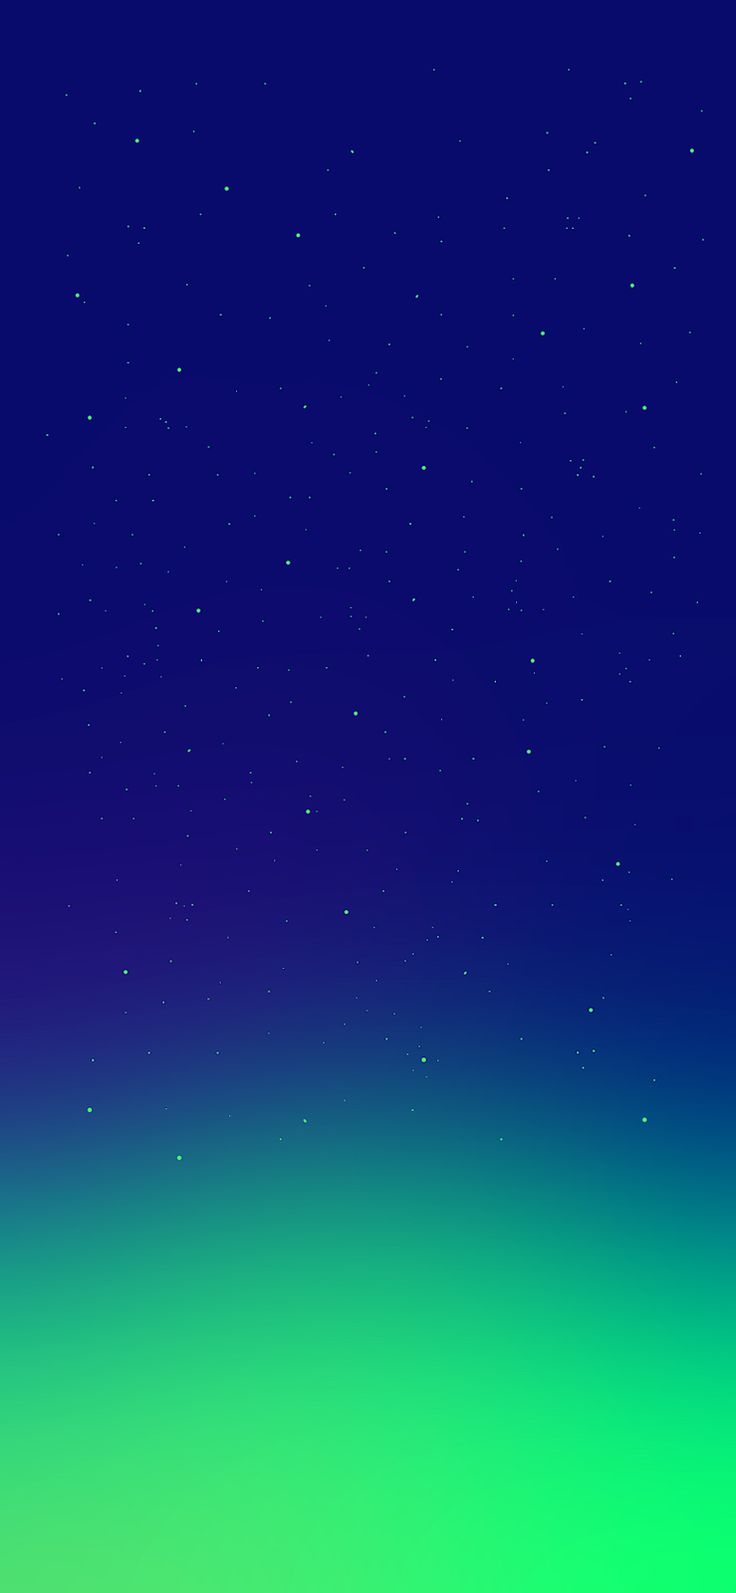 IPhone XS Wallpaper, Universe By AR72014 (iPhone X XS XR XSMAX) Magazine Daily Source Of Best Wallpaper Around The World